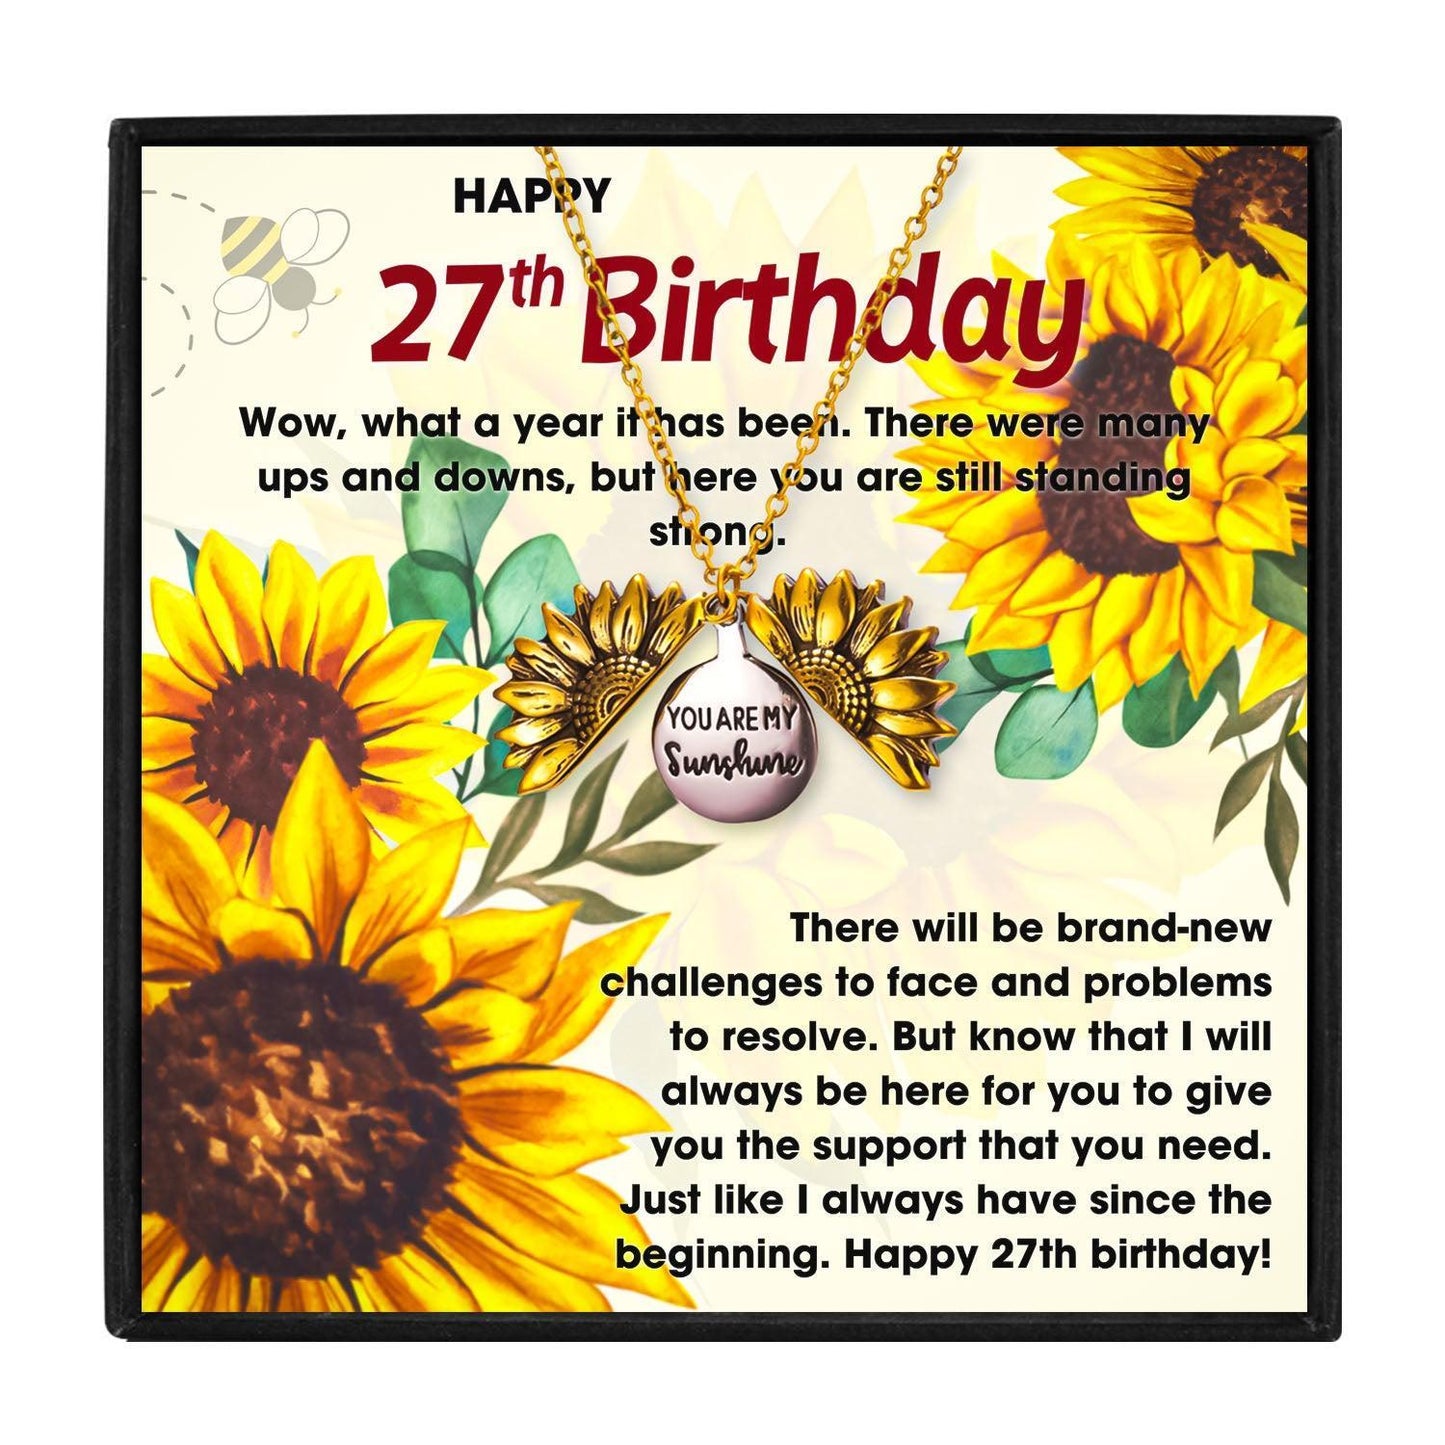 27th Birthday Gifts for Her That Are Thoughtful in 2023 | 27th Birthday Gifts for Her That Are Thoughtful - undefined | 27 birthday gift, 27th birthday gifts for her, 27th birthday ideas for her, birthday ideas for 27 | From Hunny Life | hunnylife.com